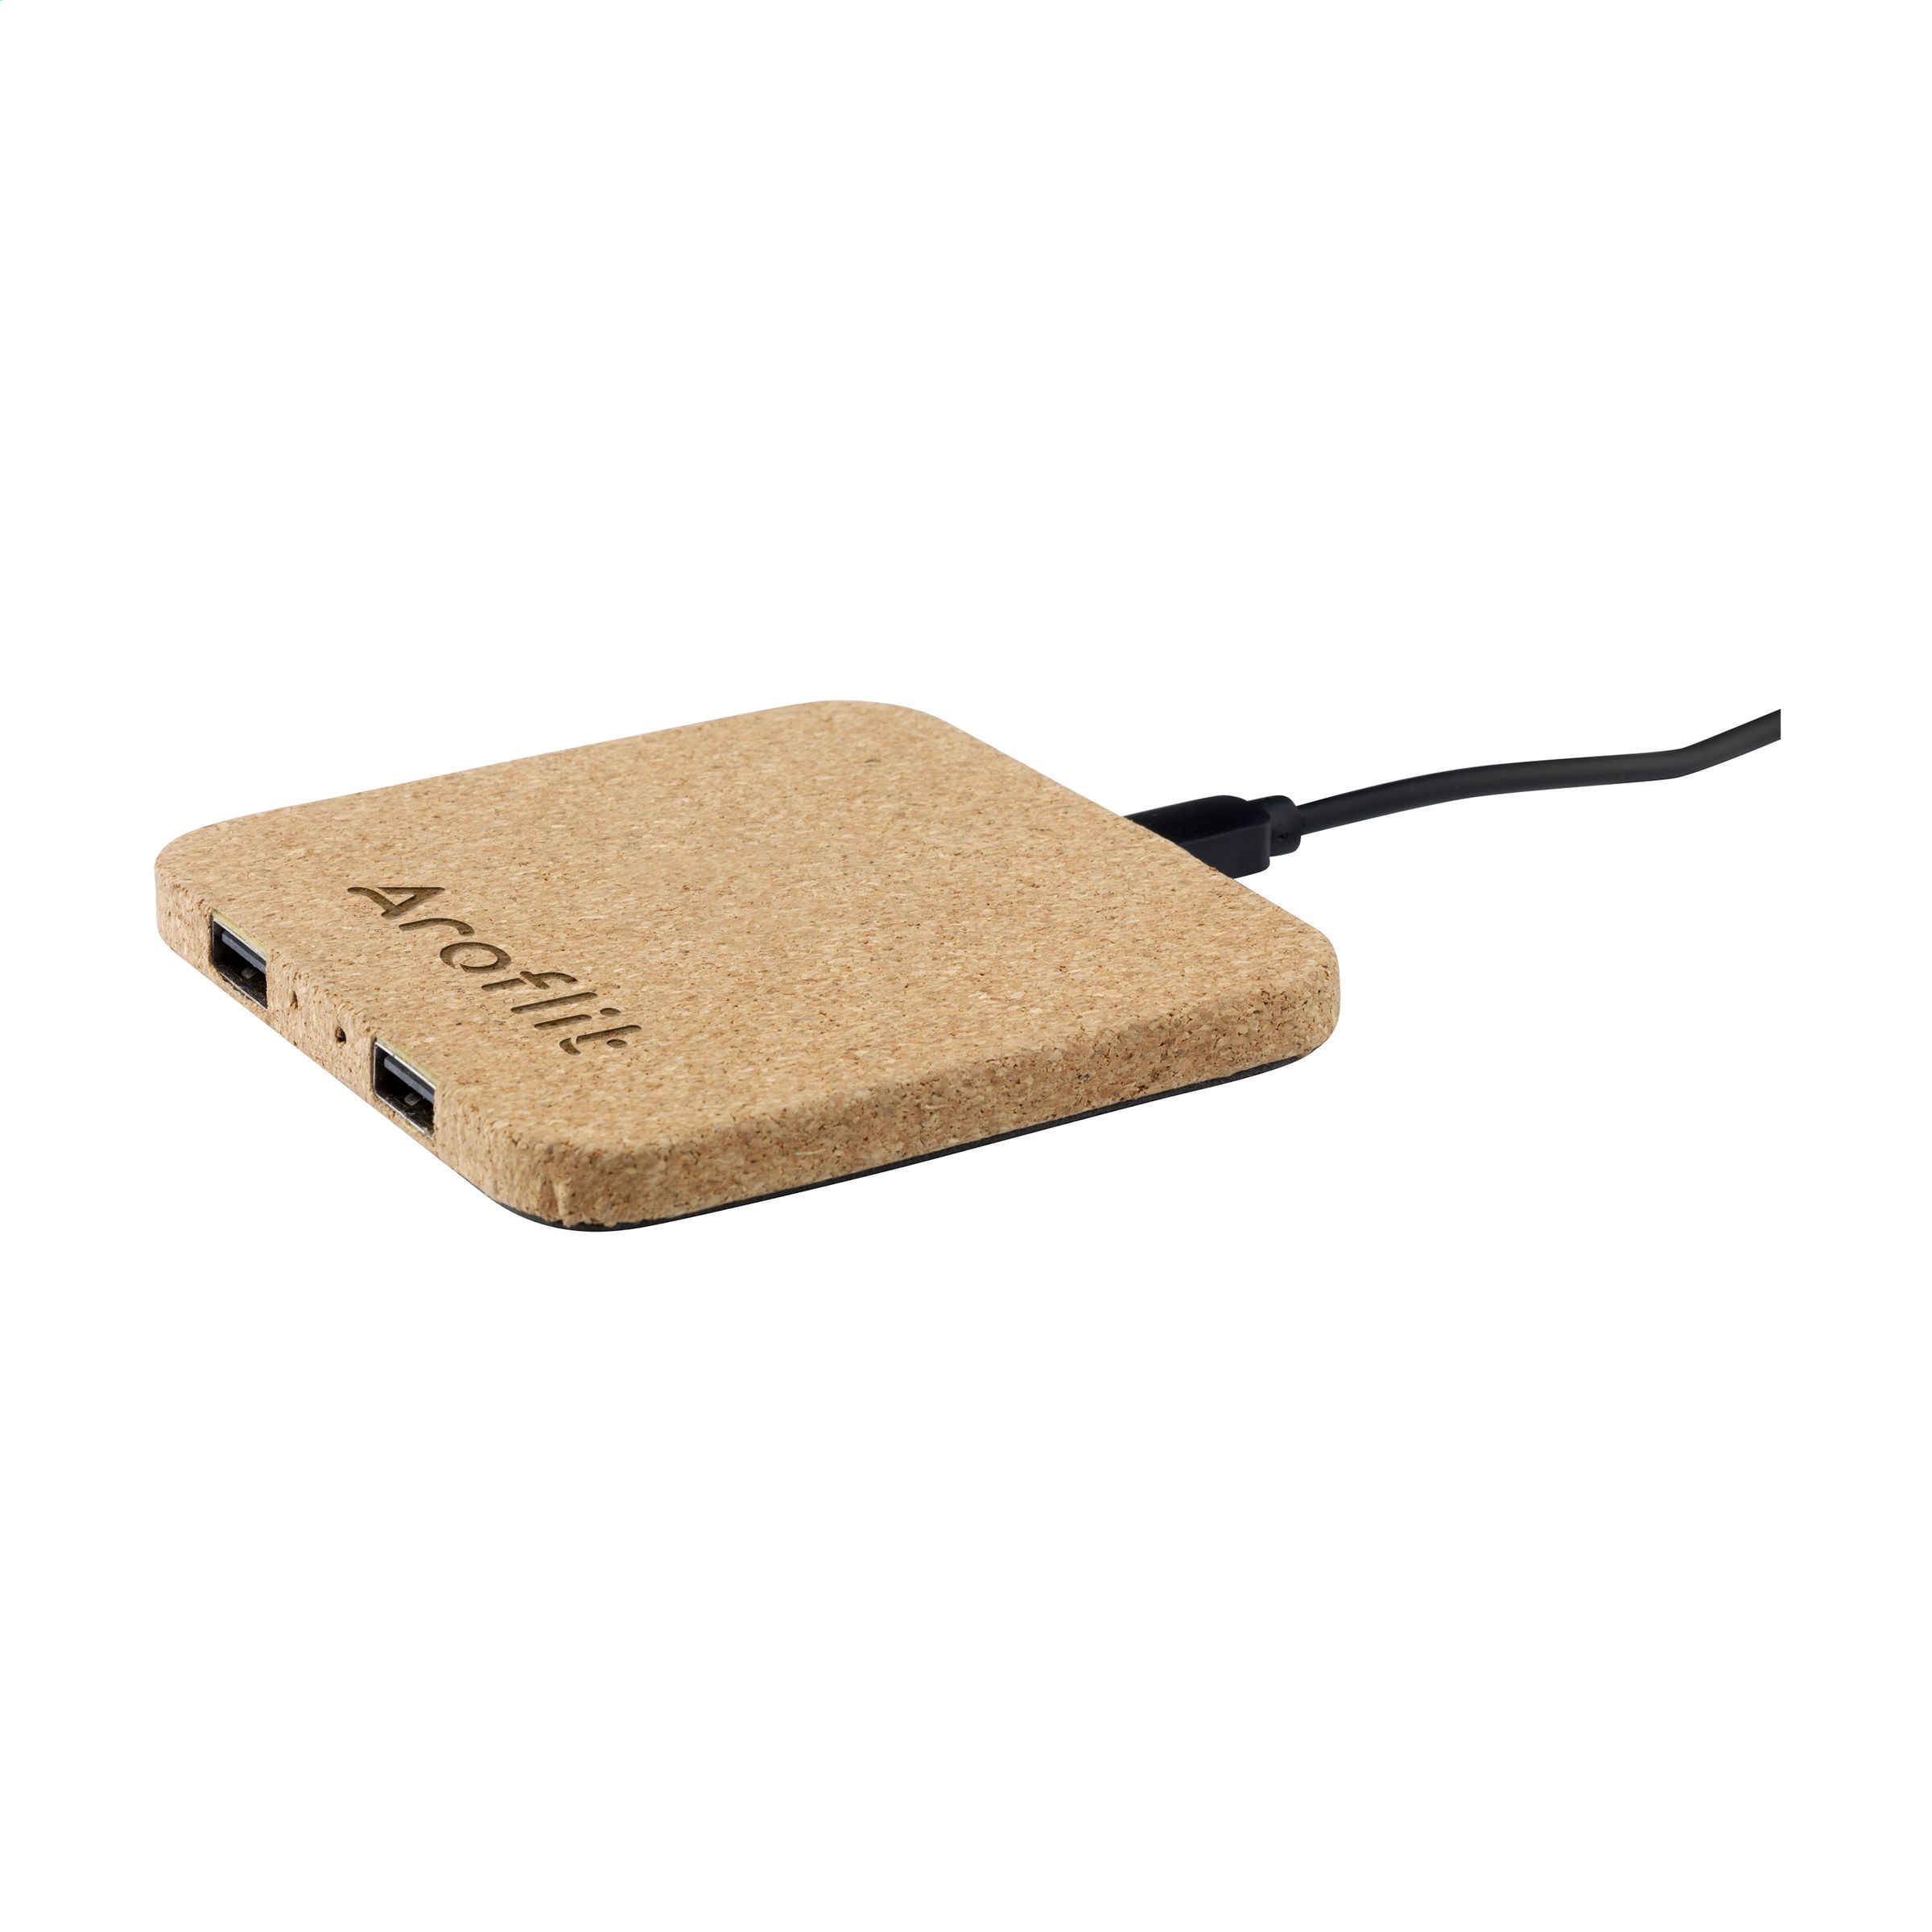 10W Wireless Charger made of Natural Cork - Dunkeld